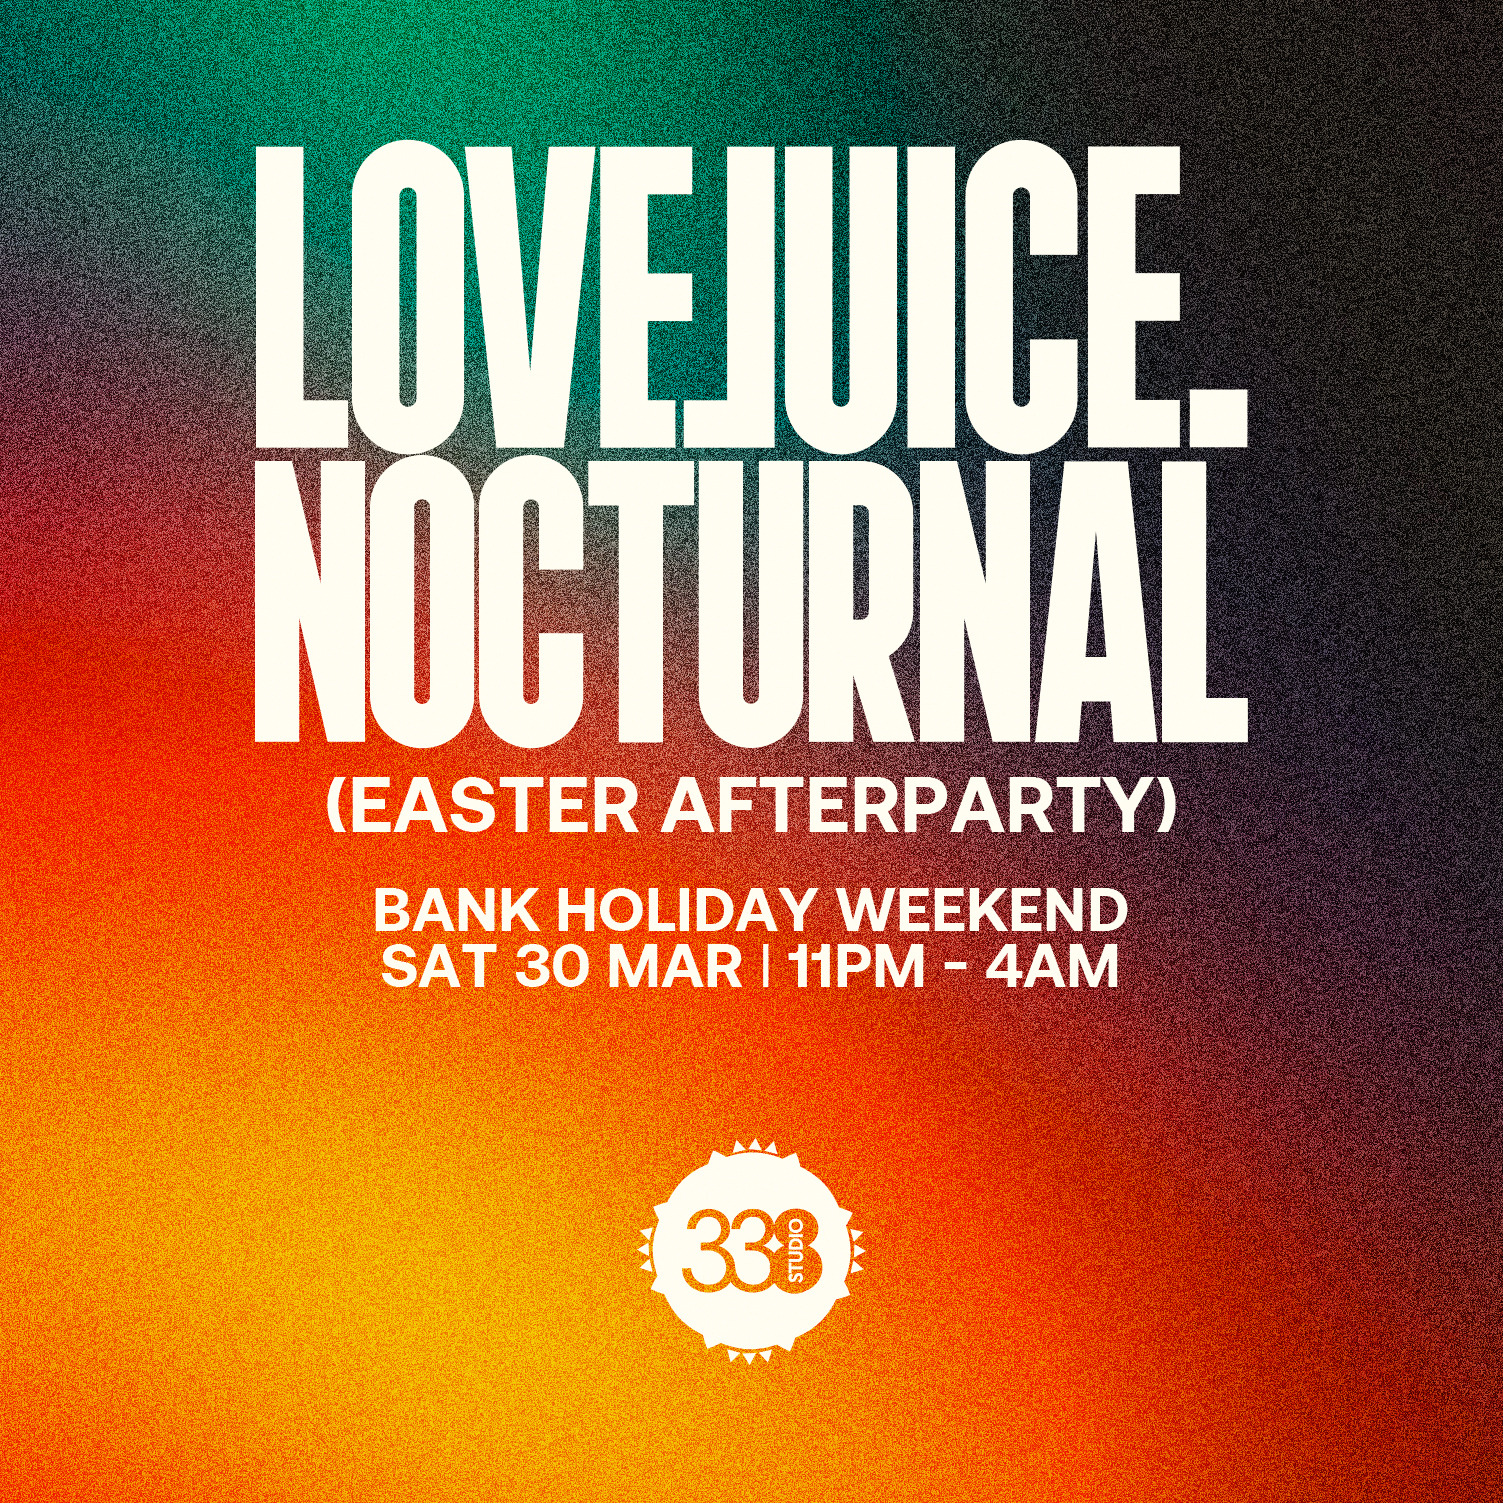 LoveJuice Nocturnal